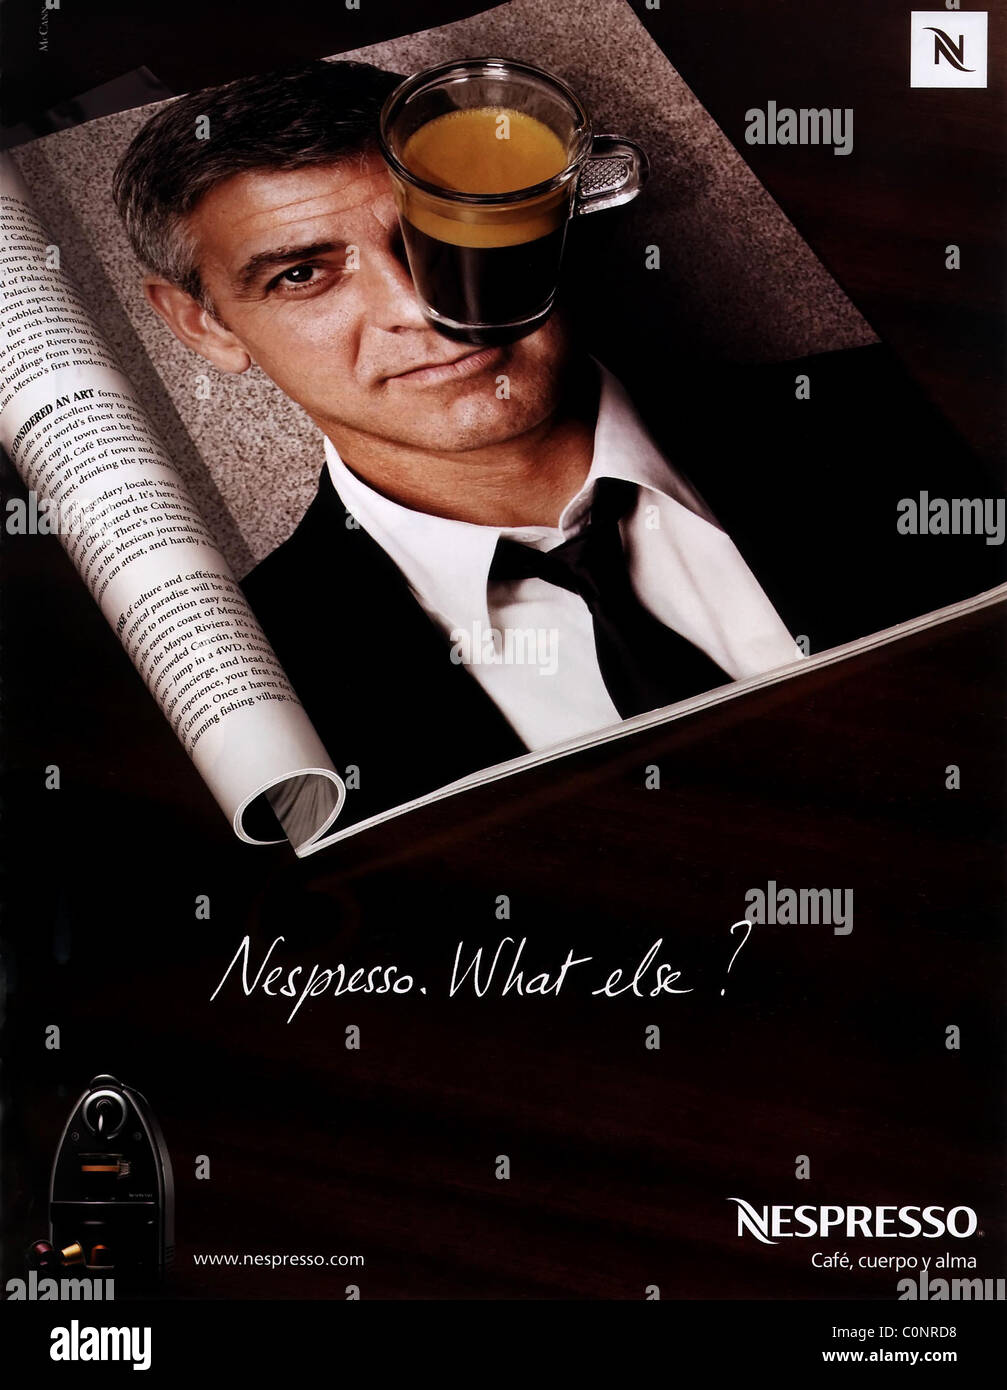 George Clooney in an advertisement for Nespresso Stock Photo - Alamy